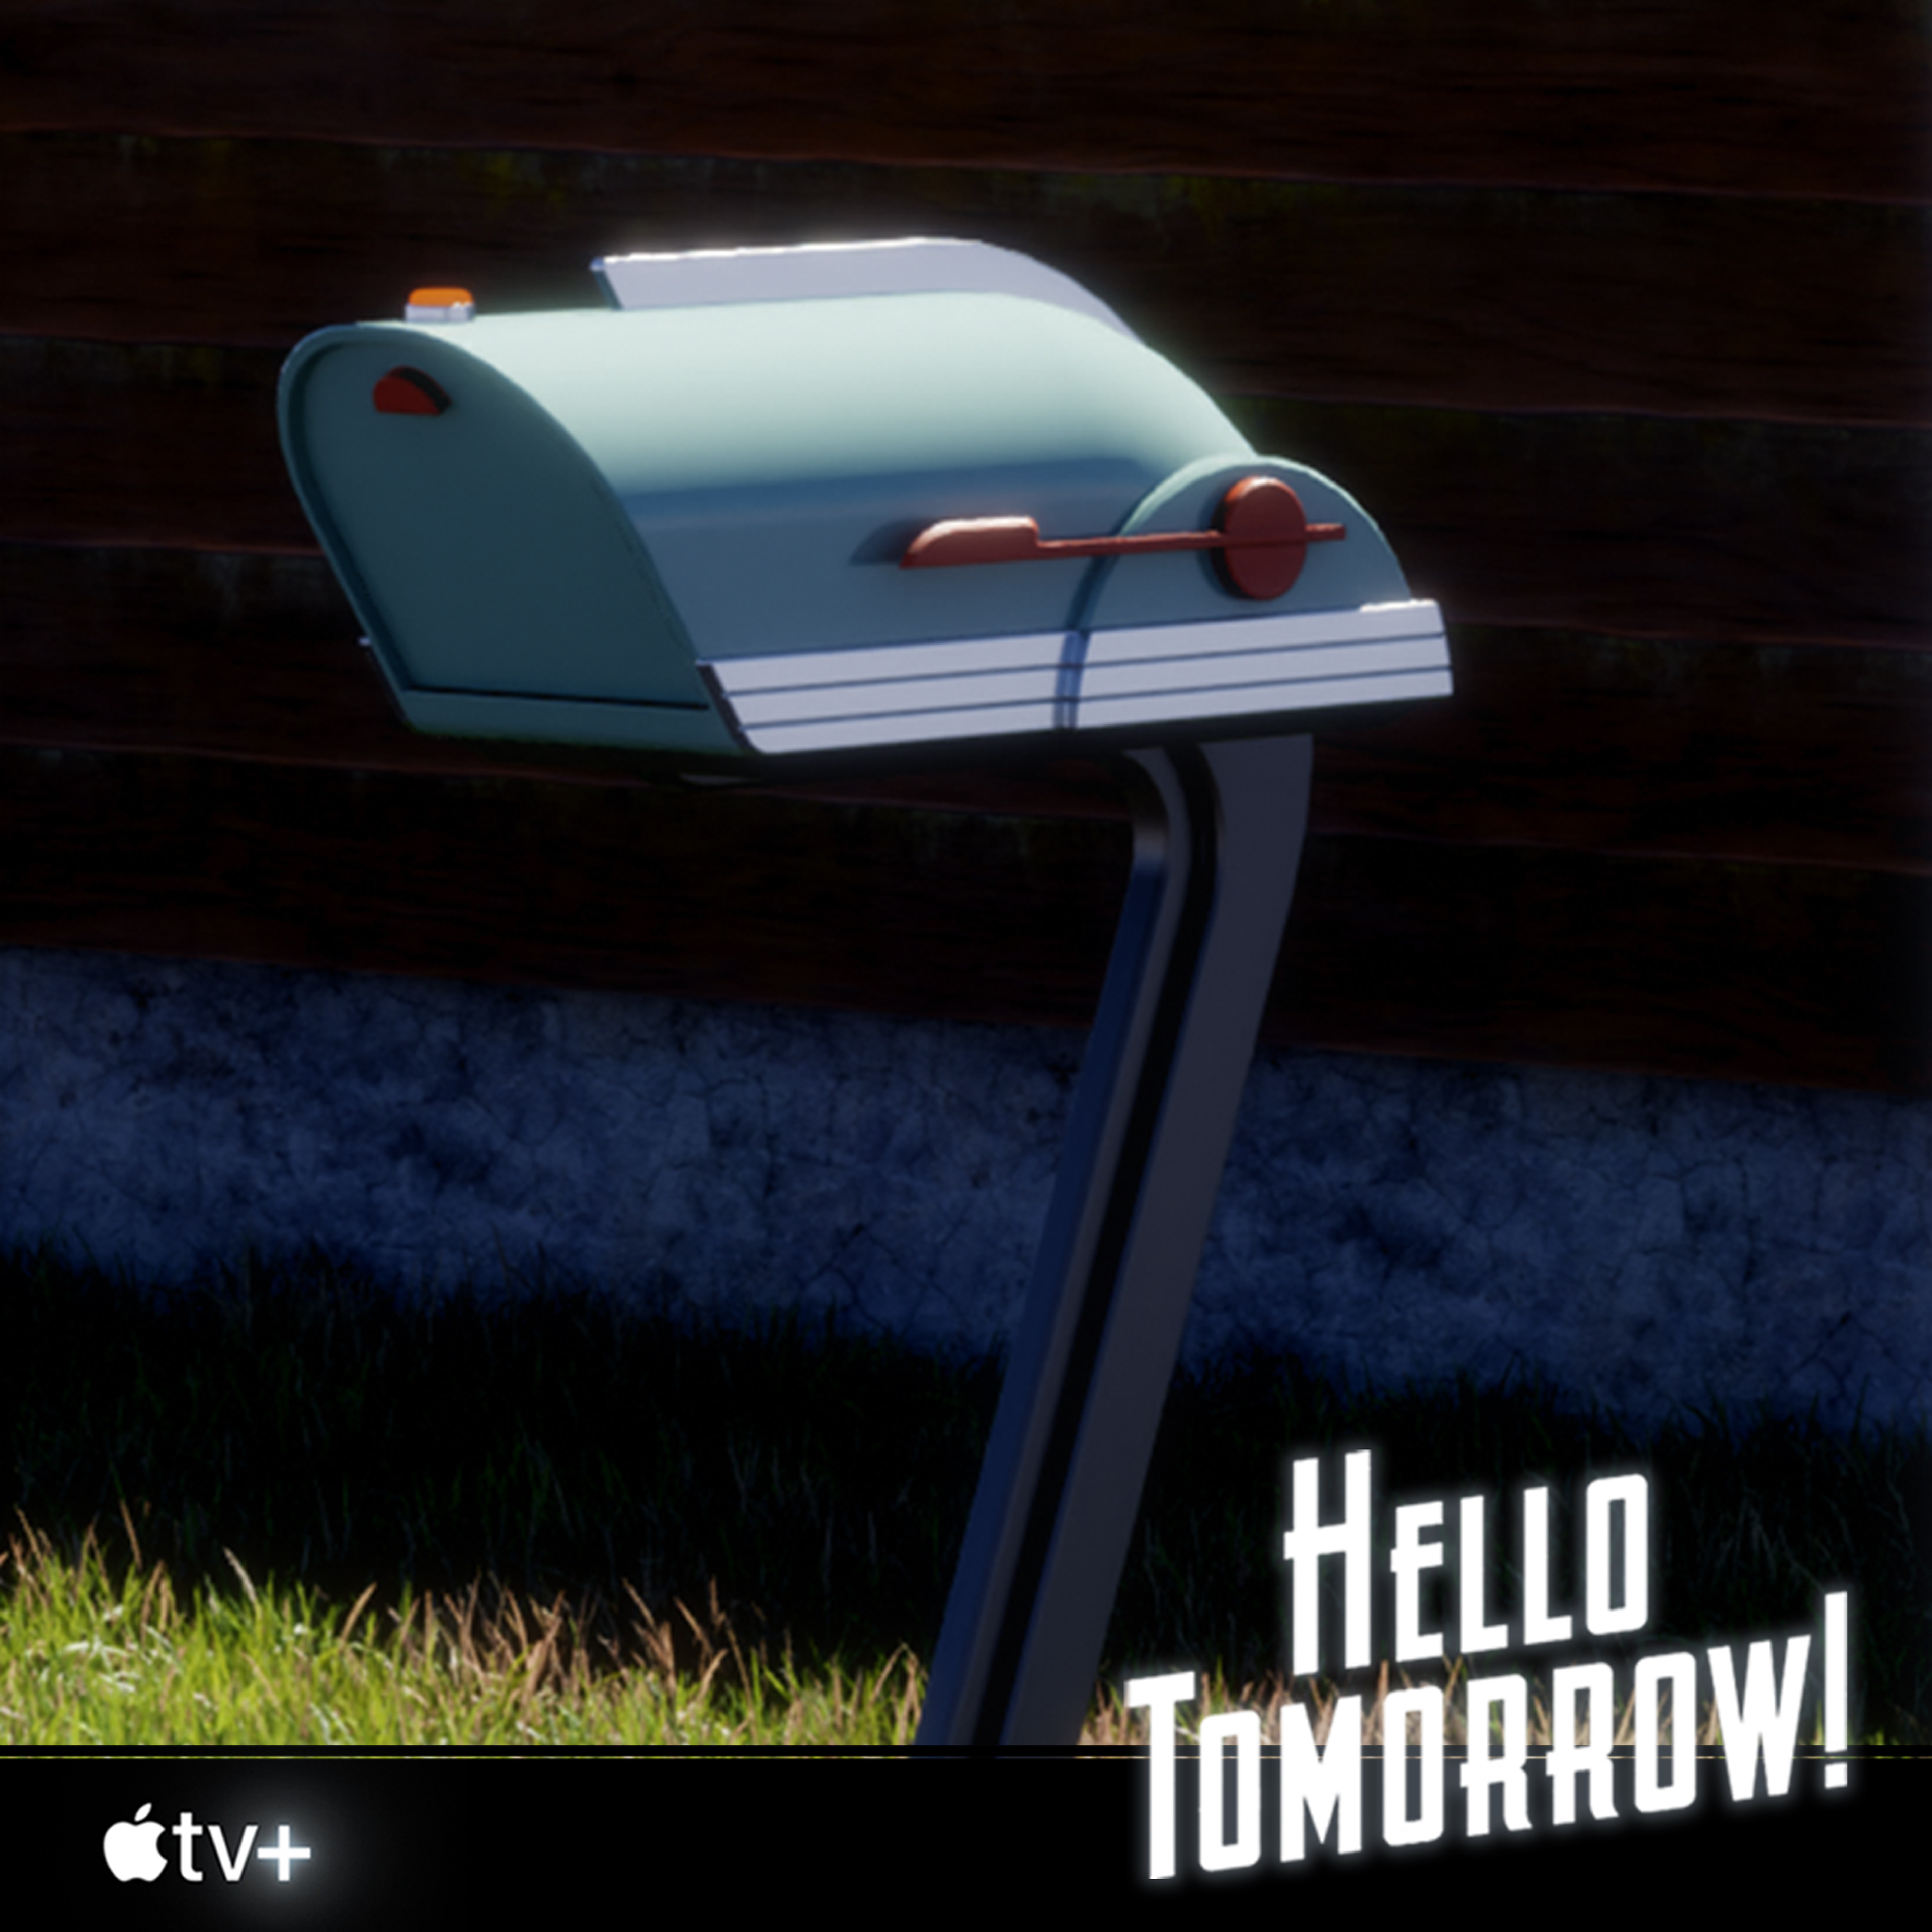 I wish this little guy had made it past the concept stage for Apple TV+‘s Hello Tomorrow! but it was not meant to be. This was a fun one to design.